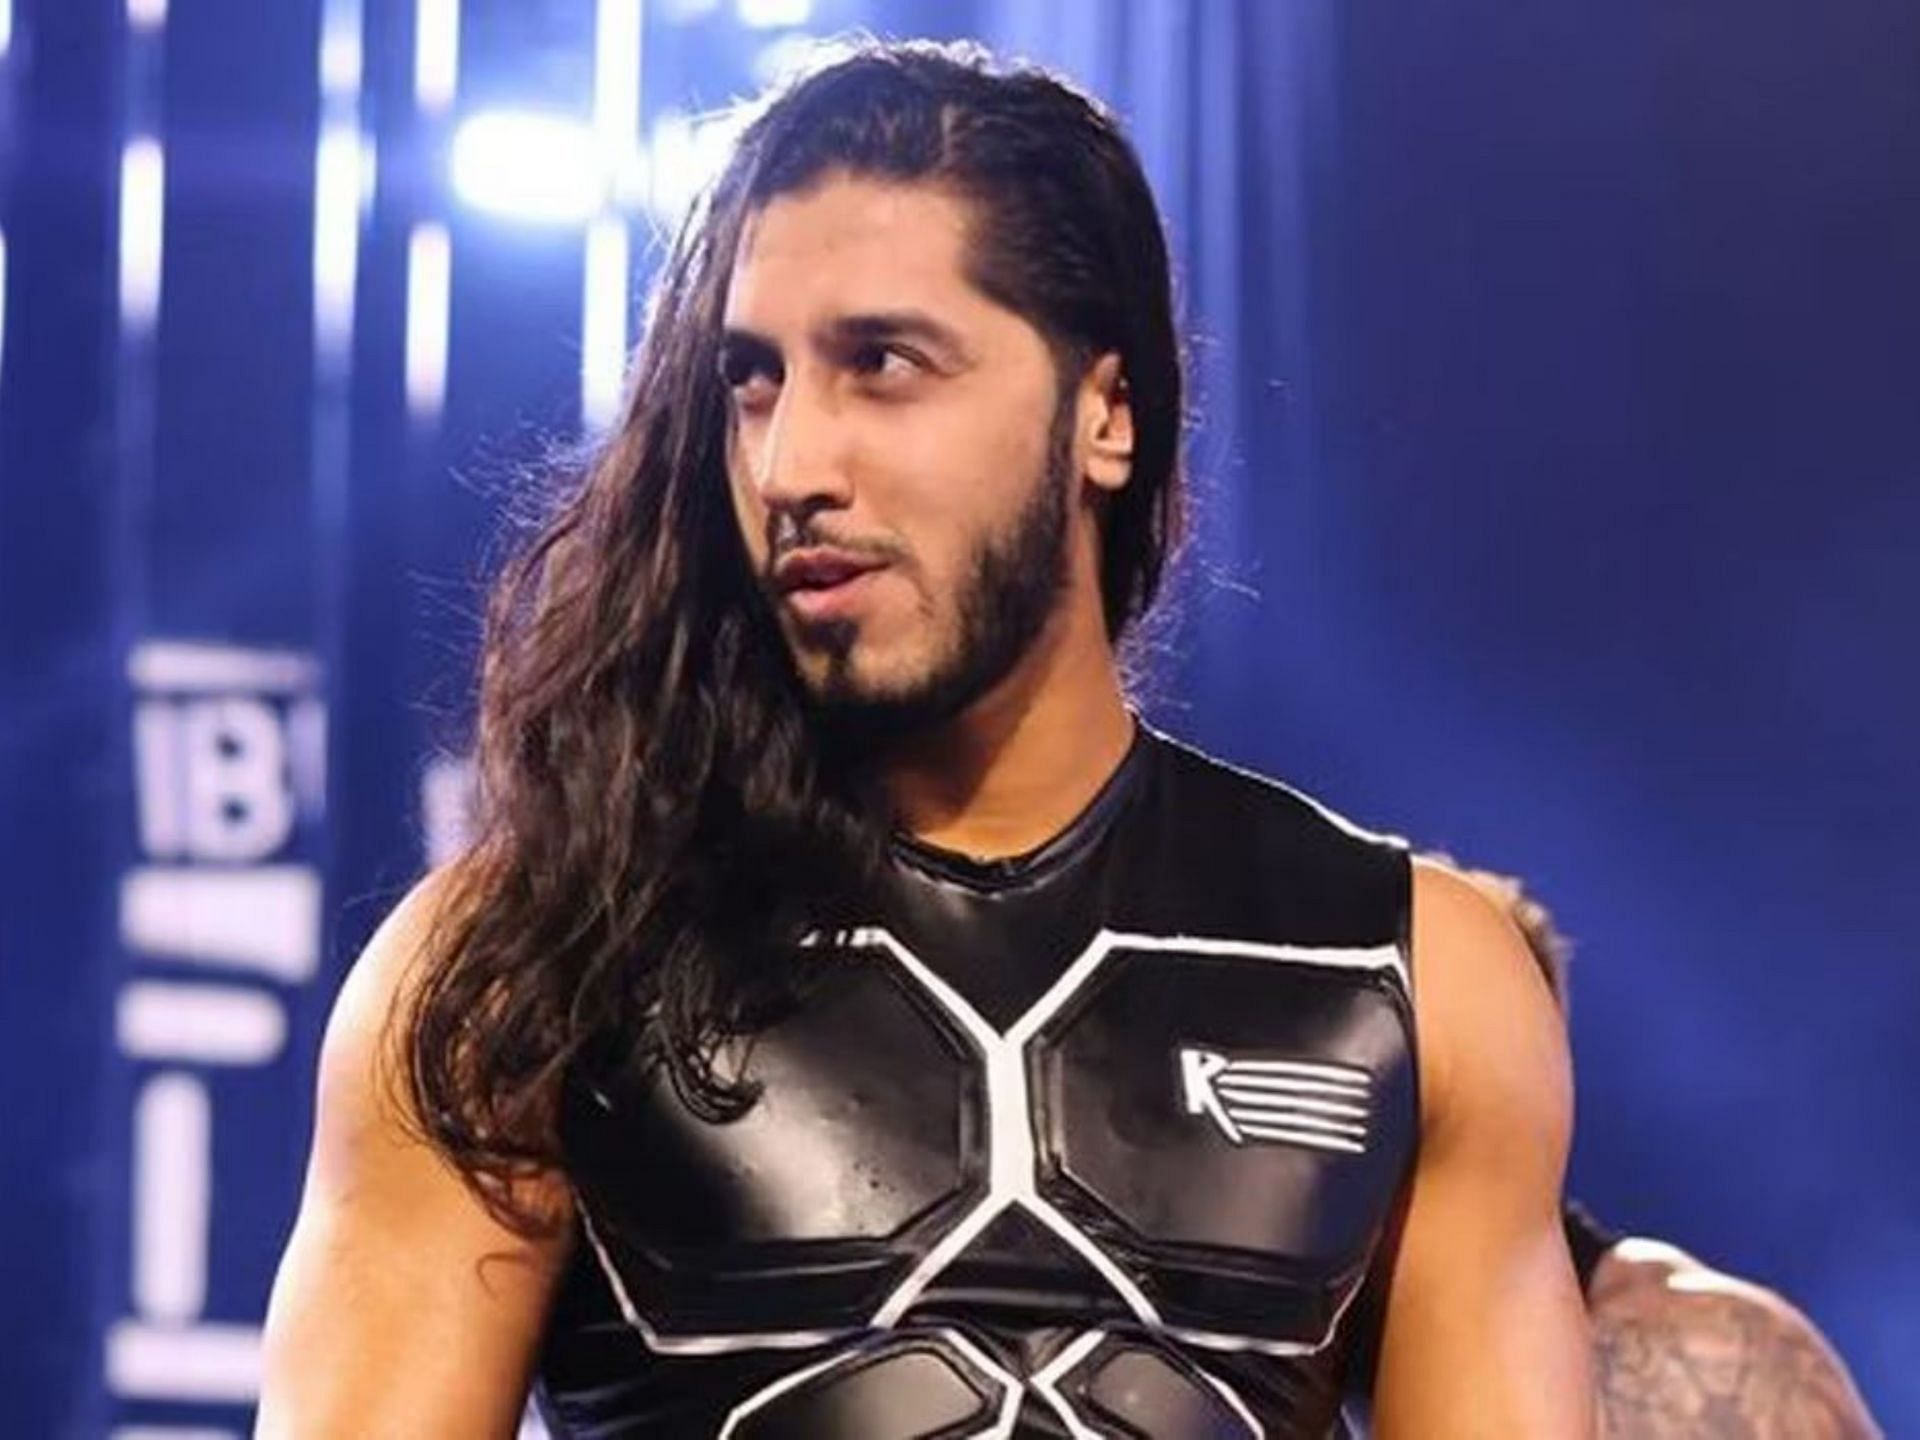 Mustafa Ali publicly requested his release last January